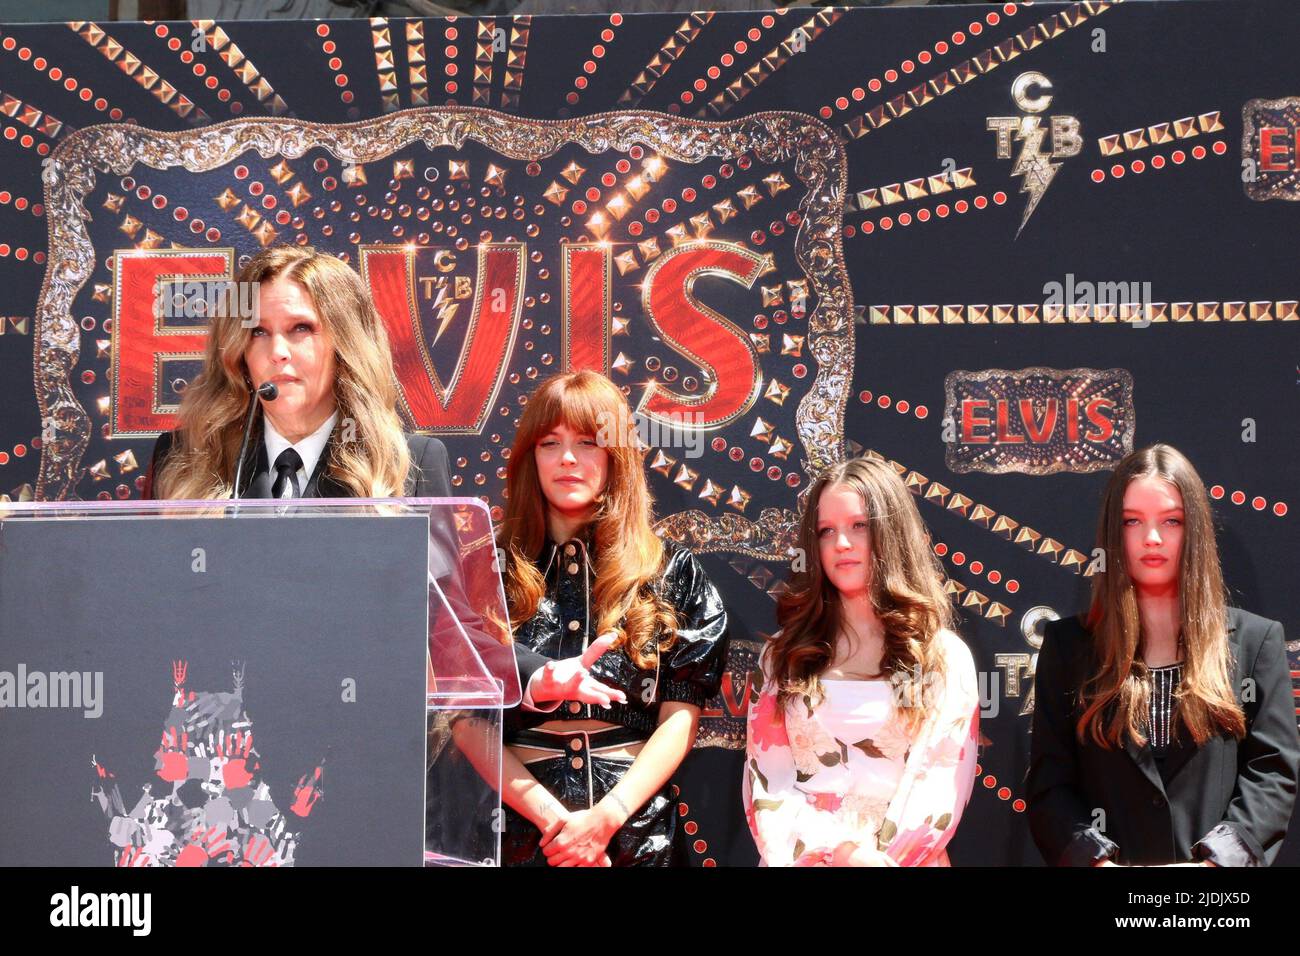 los angeles ca 21st june 2022 lisa marie presley riley keough finley aaron love lockwood harper vivienne ann lockwood at a public appearance for handprintfootprint ceremony for three generations of elvis presley family tcl chinese theatre los angeles ca june 21 2022 credit priscilla granteverett collectionalamy live news 2JDJX5D